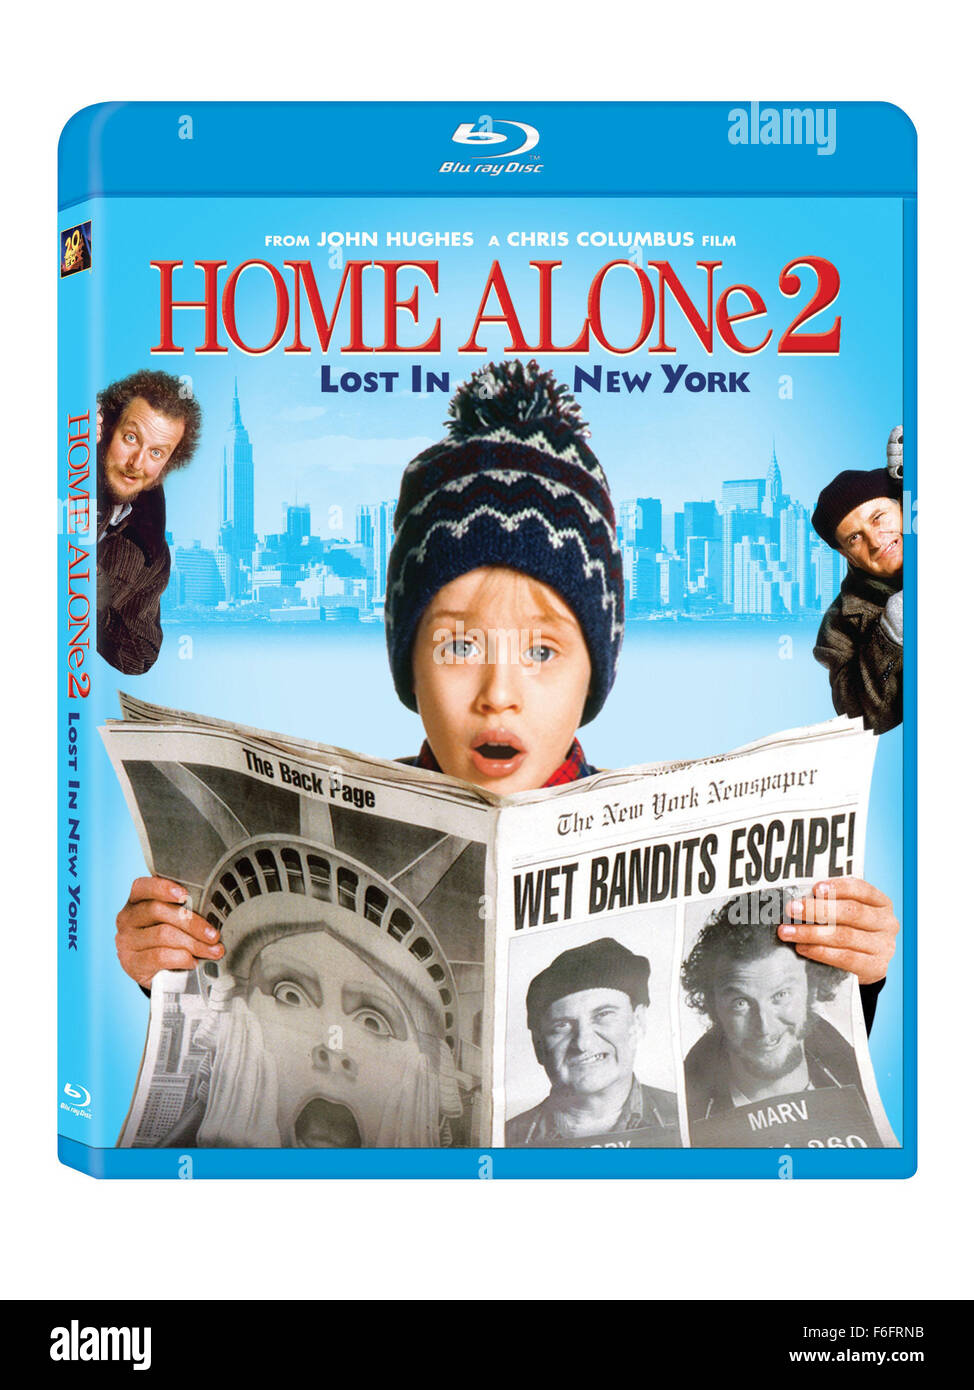 RELEASE DATE: November 20, 1992. MOVIE TITLE: Home Alone 2: Lost in New York. STUDIO: 20th Century Fox. PLOT: Kevin McCallister is back. But this time he's in New York City with enough cash and credit cards to turn the Big Apple into his very own playground. But Kevin won't be alone for long. The notorious Wet Bandits, Harry and Marv, still smarting from their last encounter with Kevin, are bound for New York too, plotting a huge holiday heist! Kevin's ready to welcome them with more battery of booby traps the bumbling bandits will never forget! PICTURED: MACAULAY CULKIN as Kevin McCallister, Stock Photo